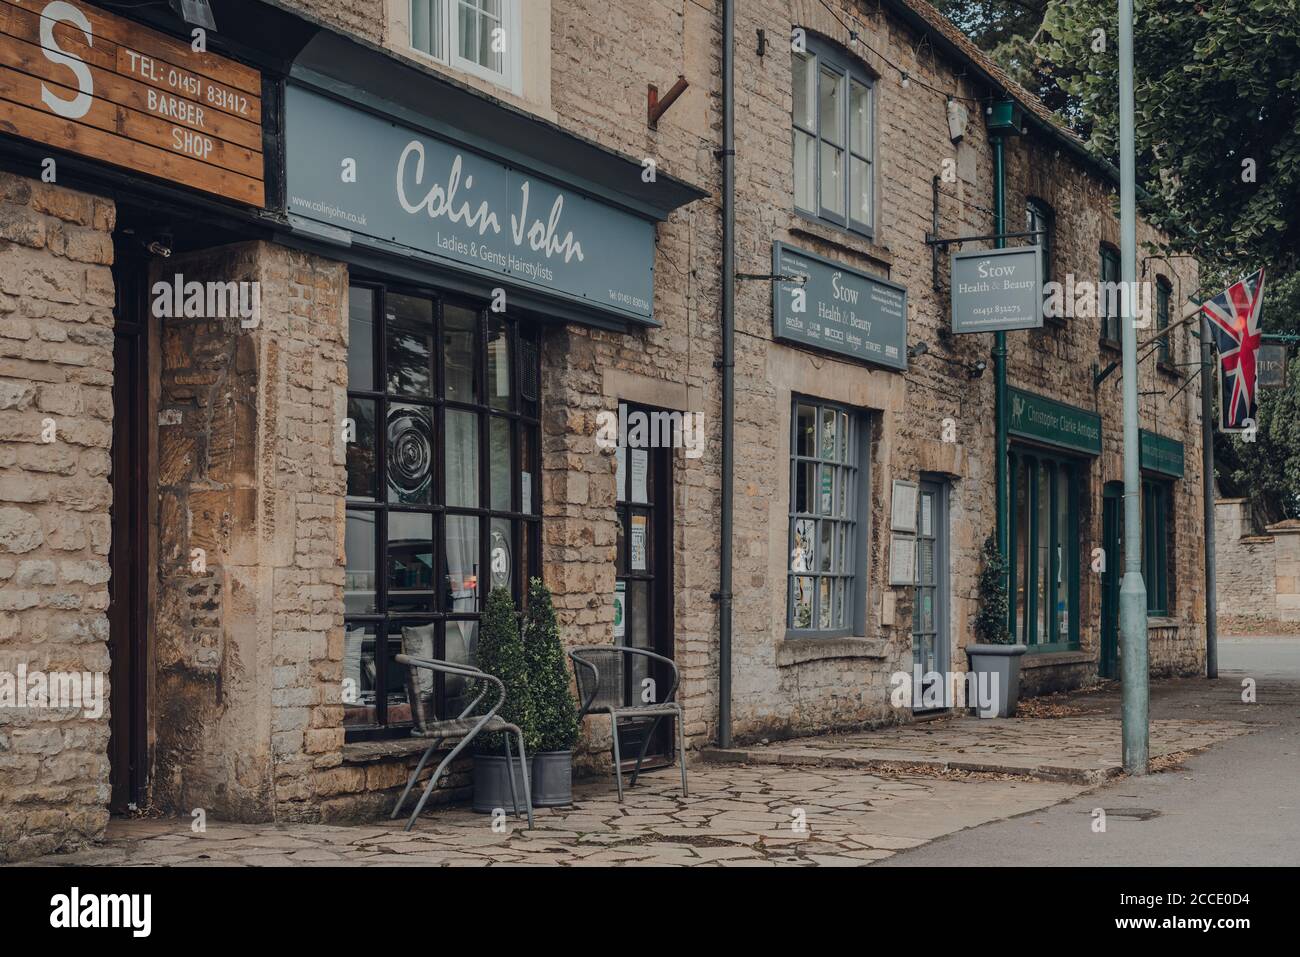 Stow-on-the-Wold, UK - July 10, 2020: Row of closed hair dressers and beauty salons in Stow-on-the-Wold, a market town in Cotswolds, UK, built on Roma Stock Photo